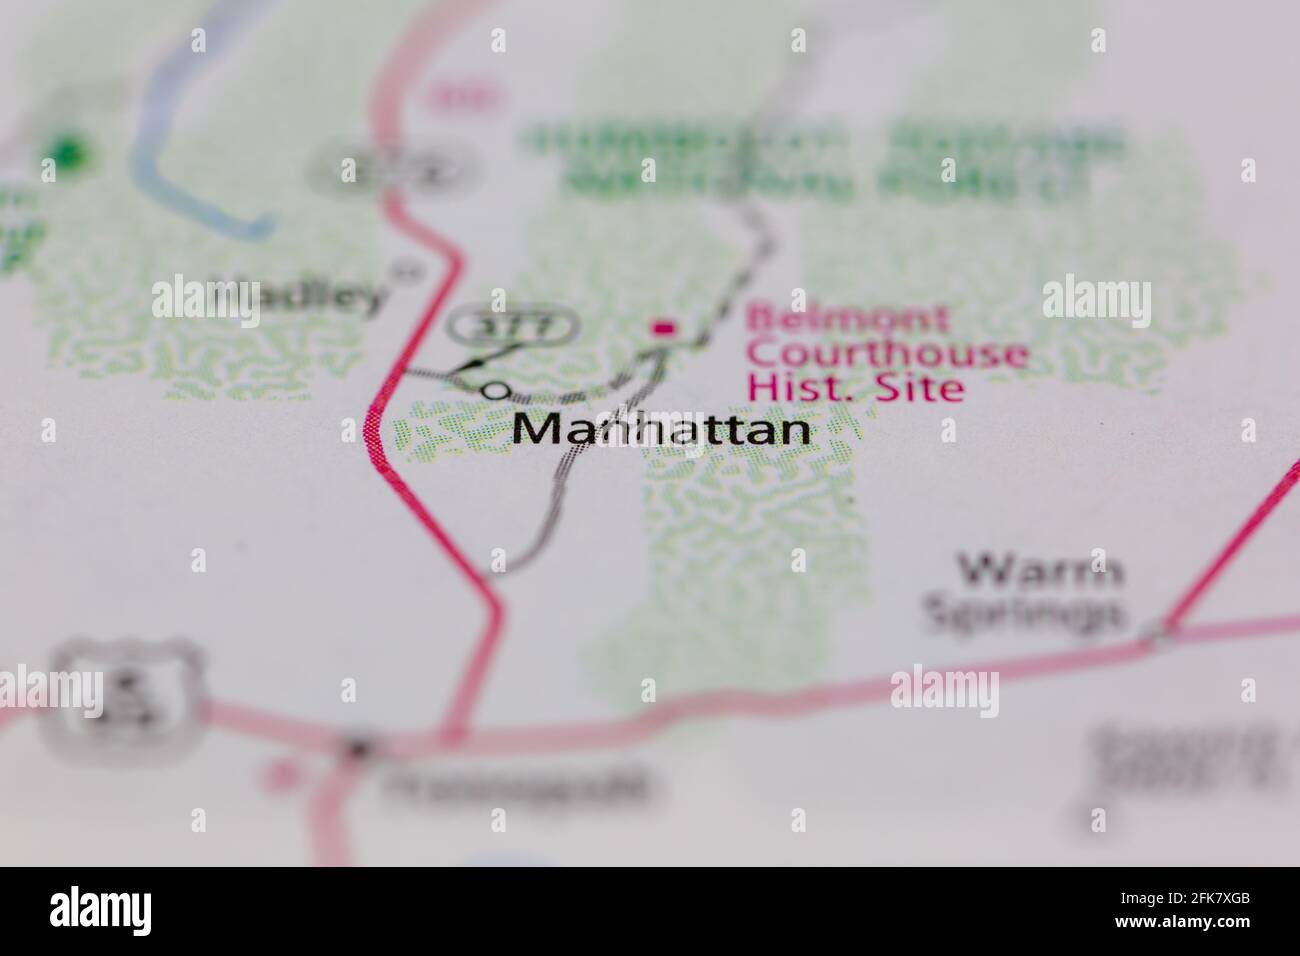 Manhattan California USA shown on a Geography map or road map Stock Photo